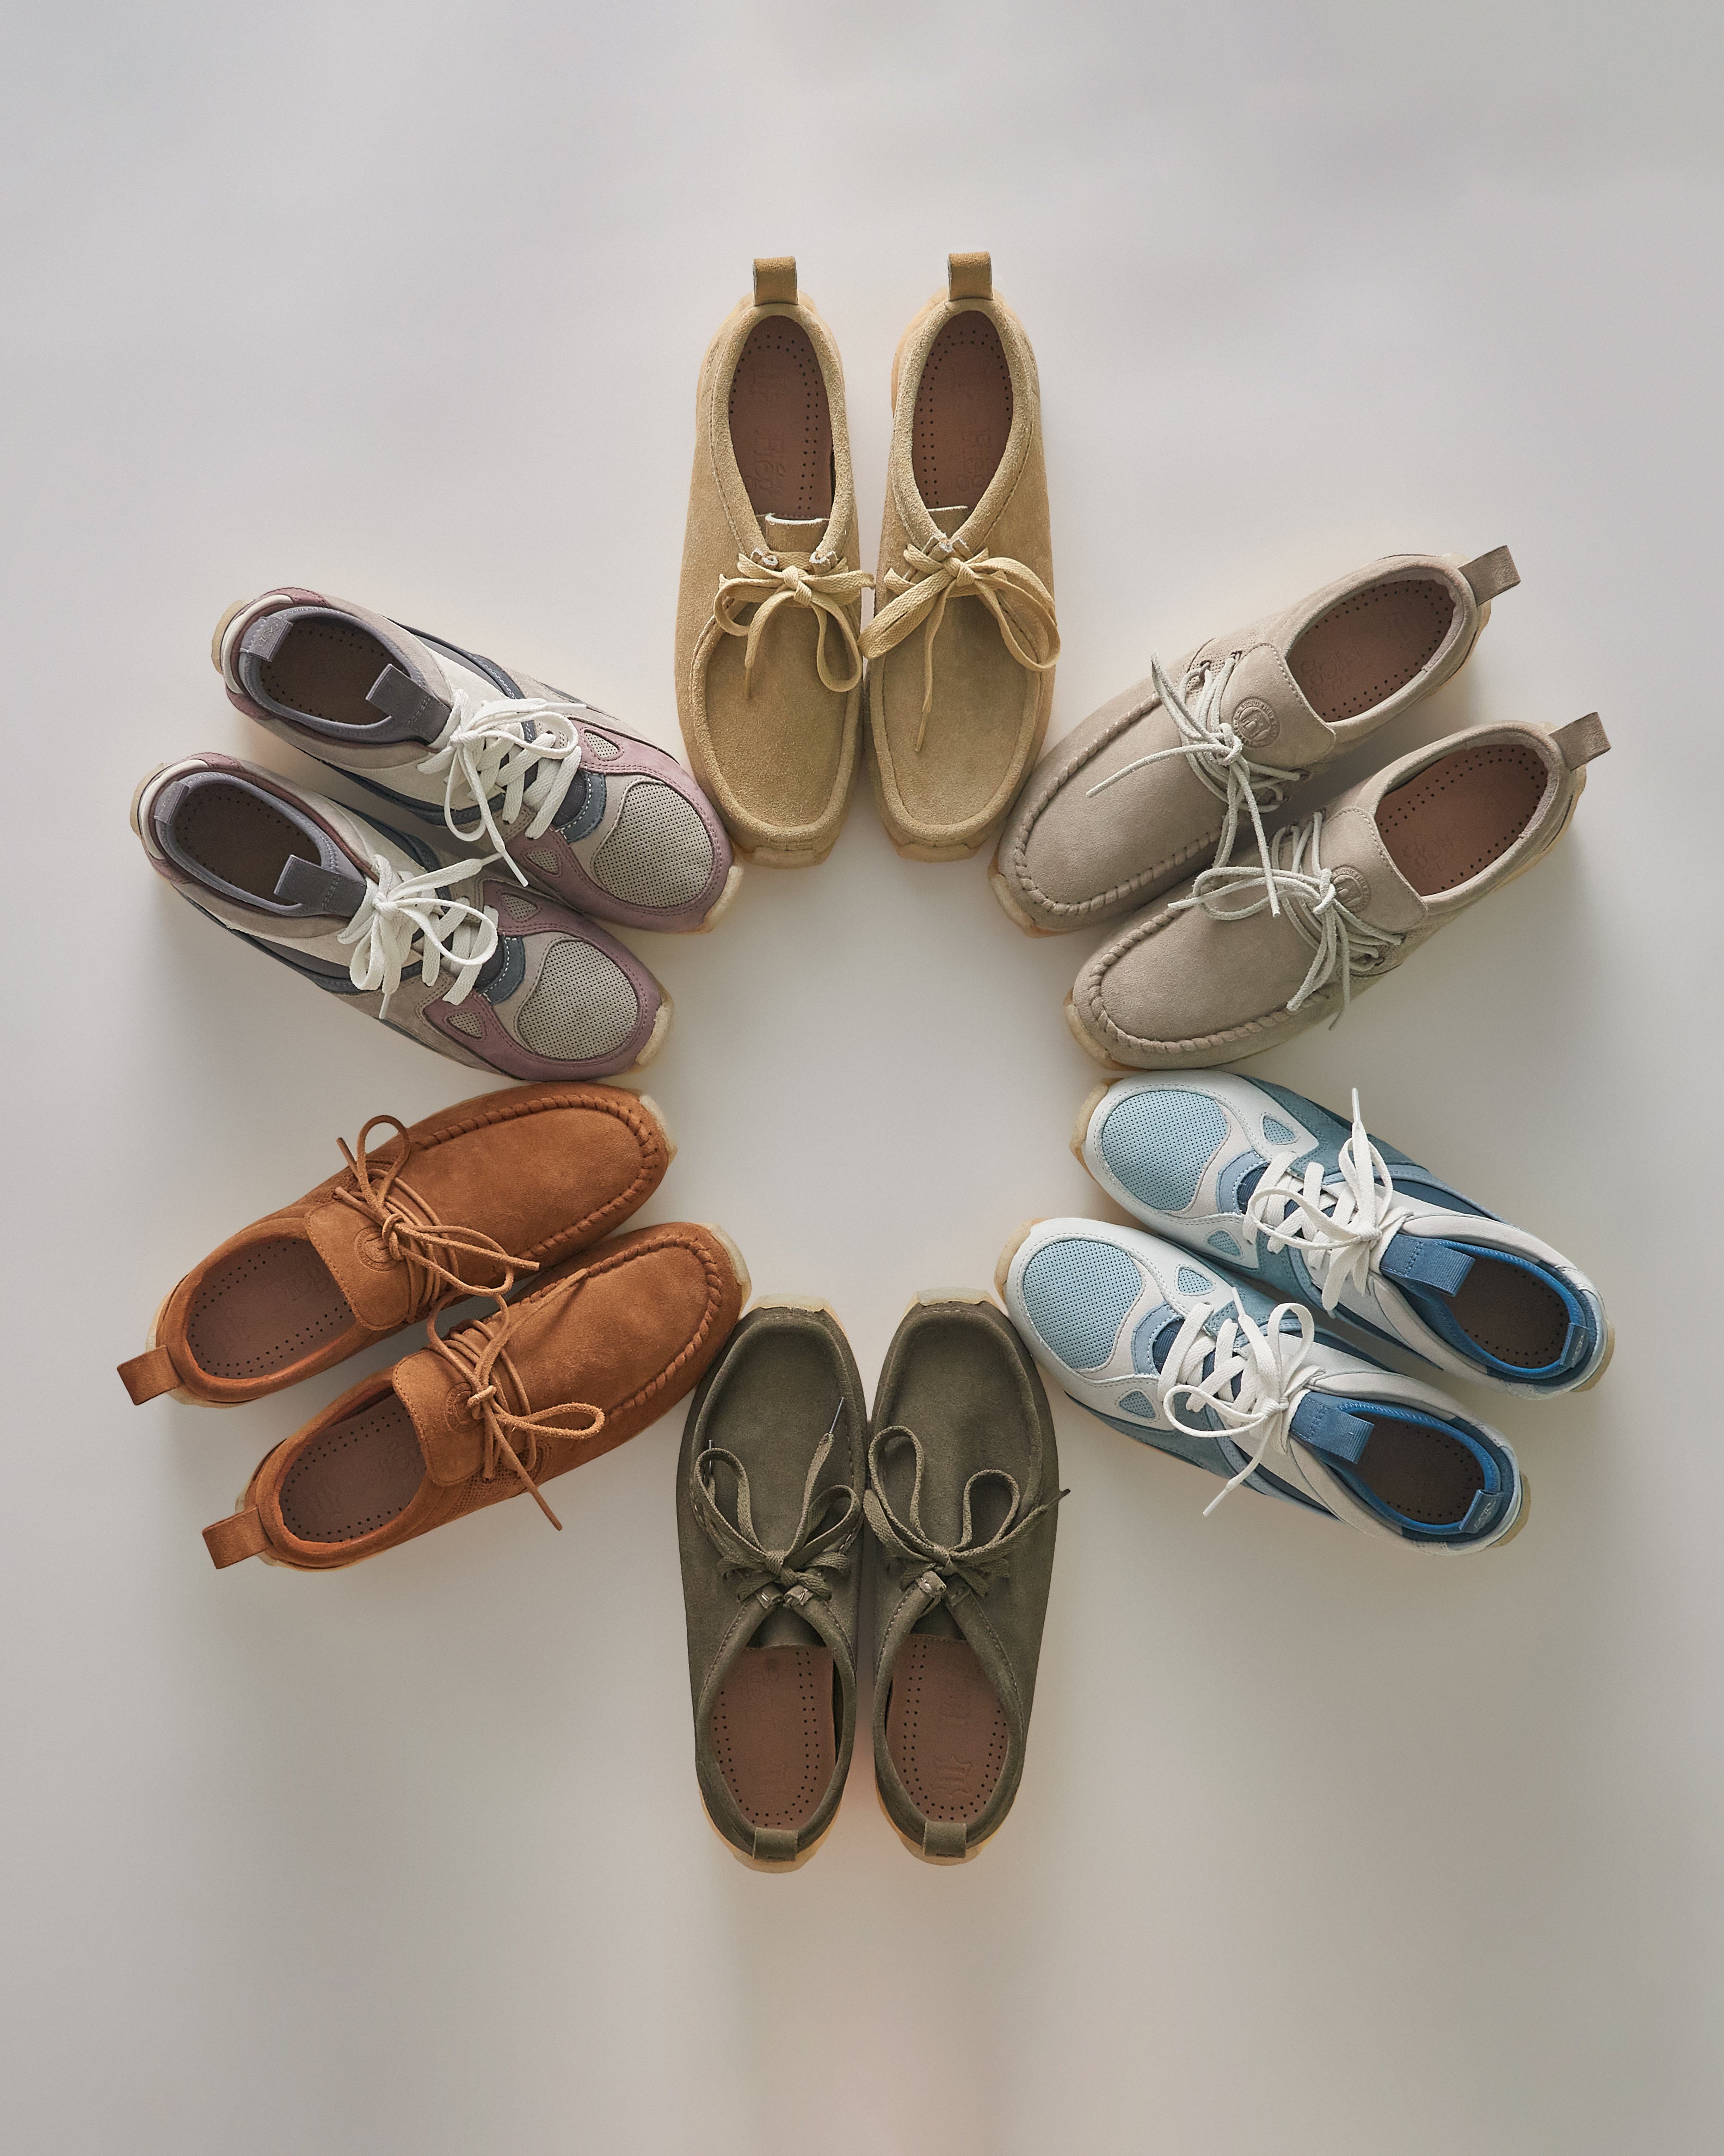 St. by Ronnie Fieg for Clarks Originals, 4 – Kith